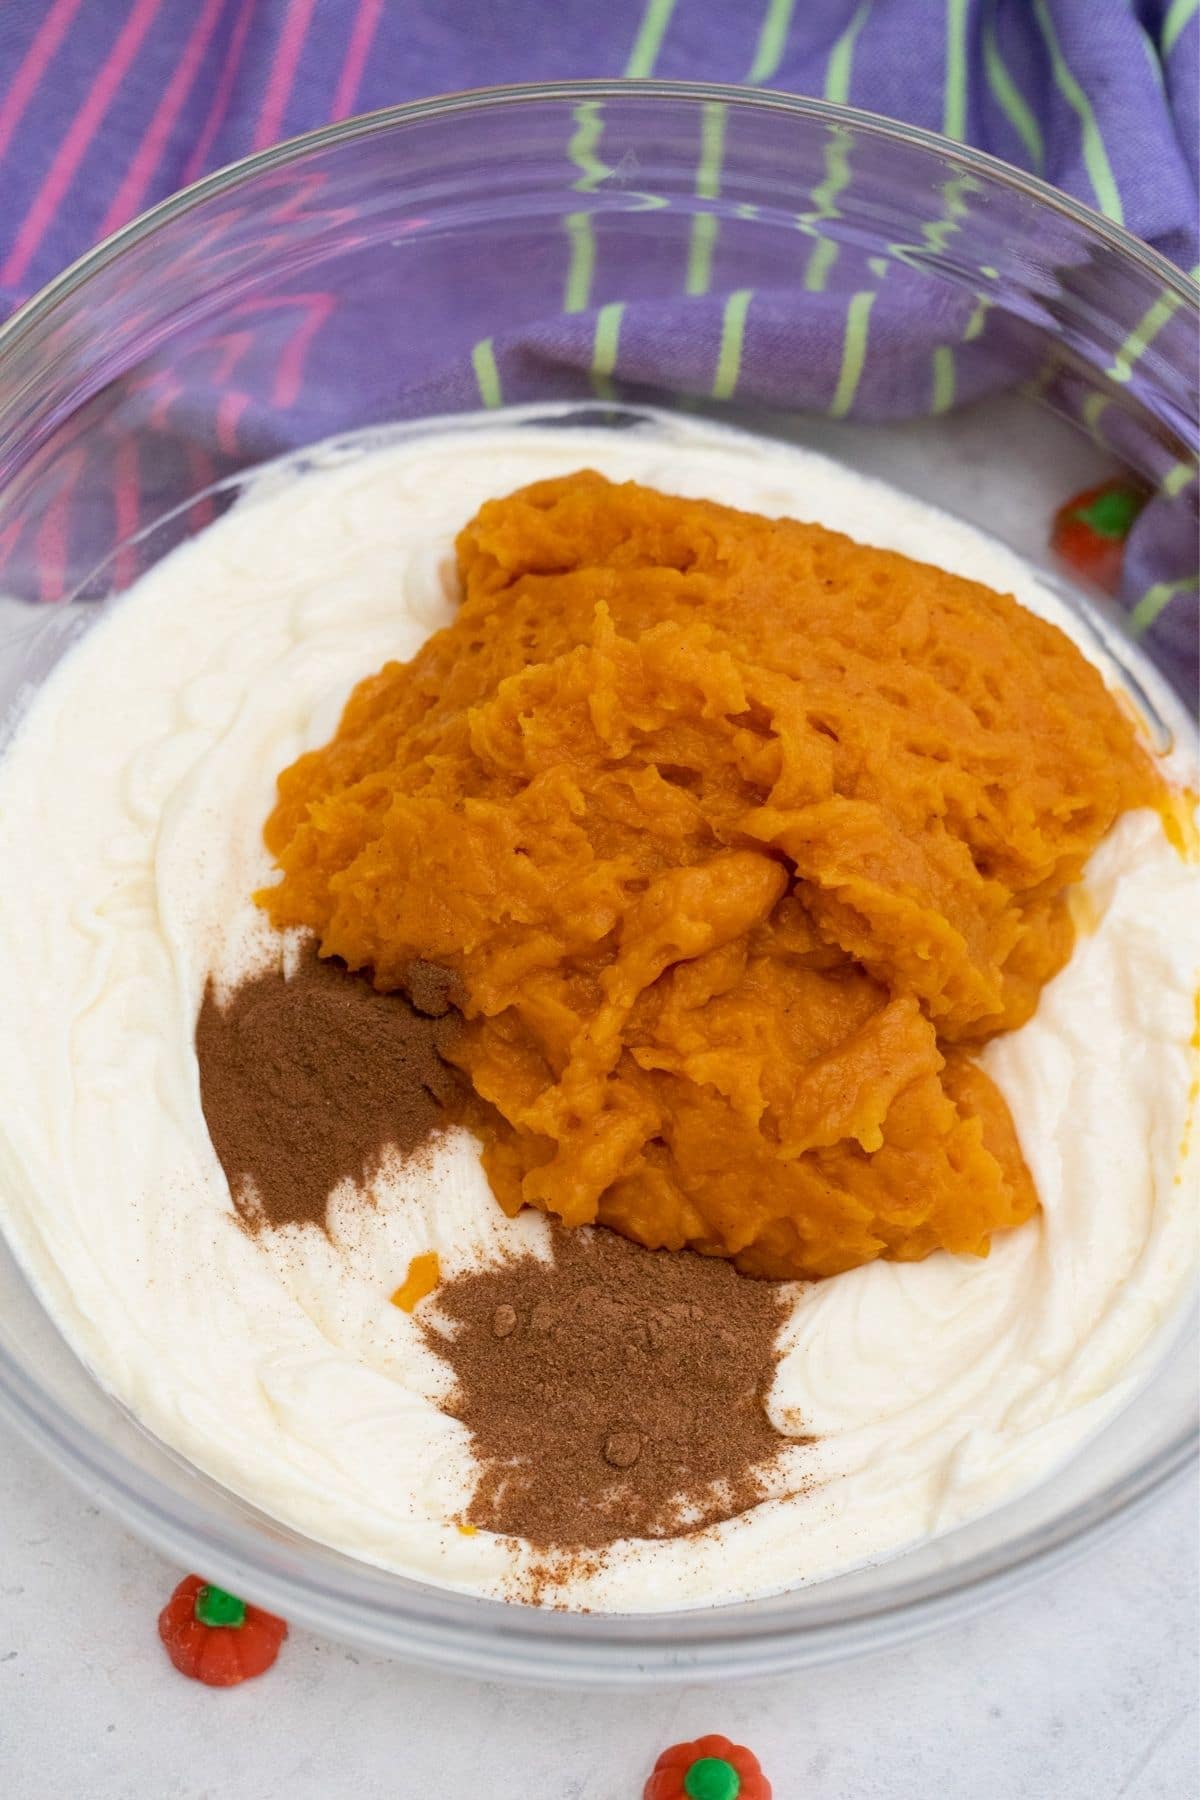 Large glass bowl of cream cheese with pumpkin and spice on top